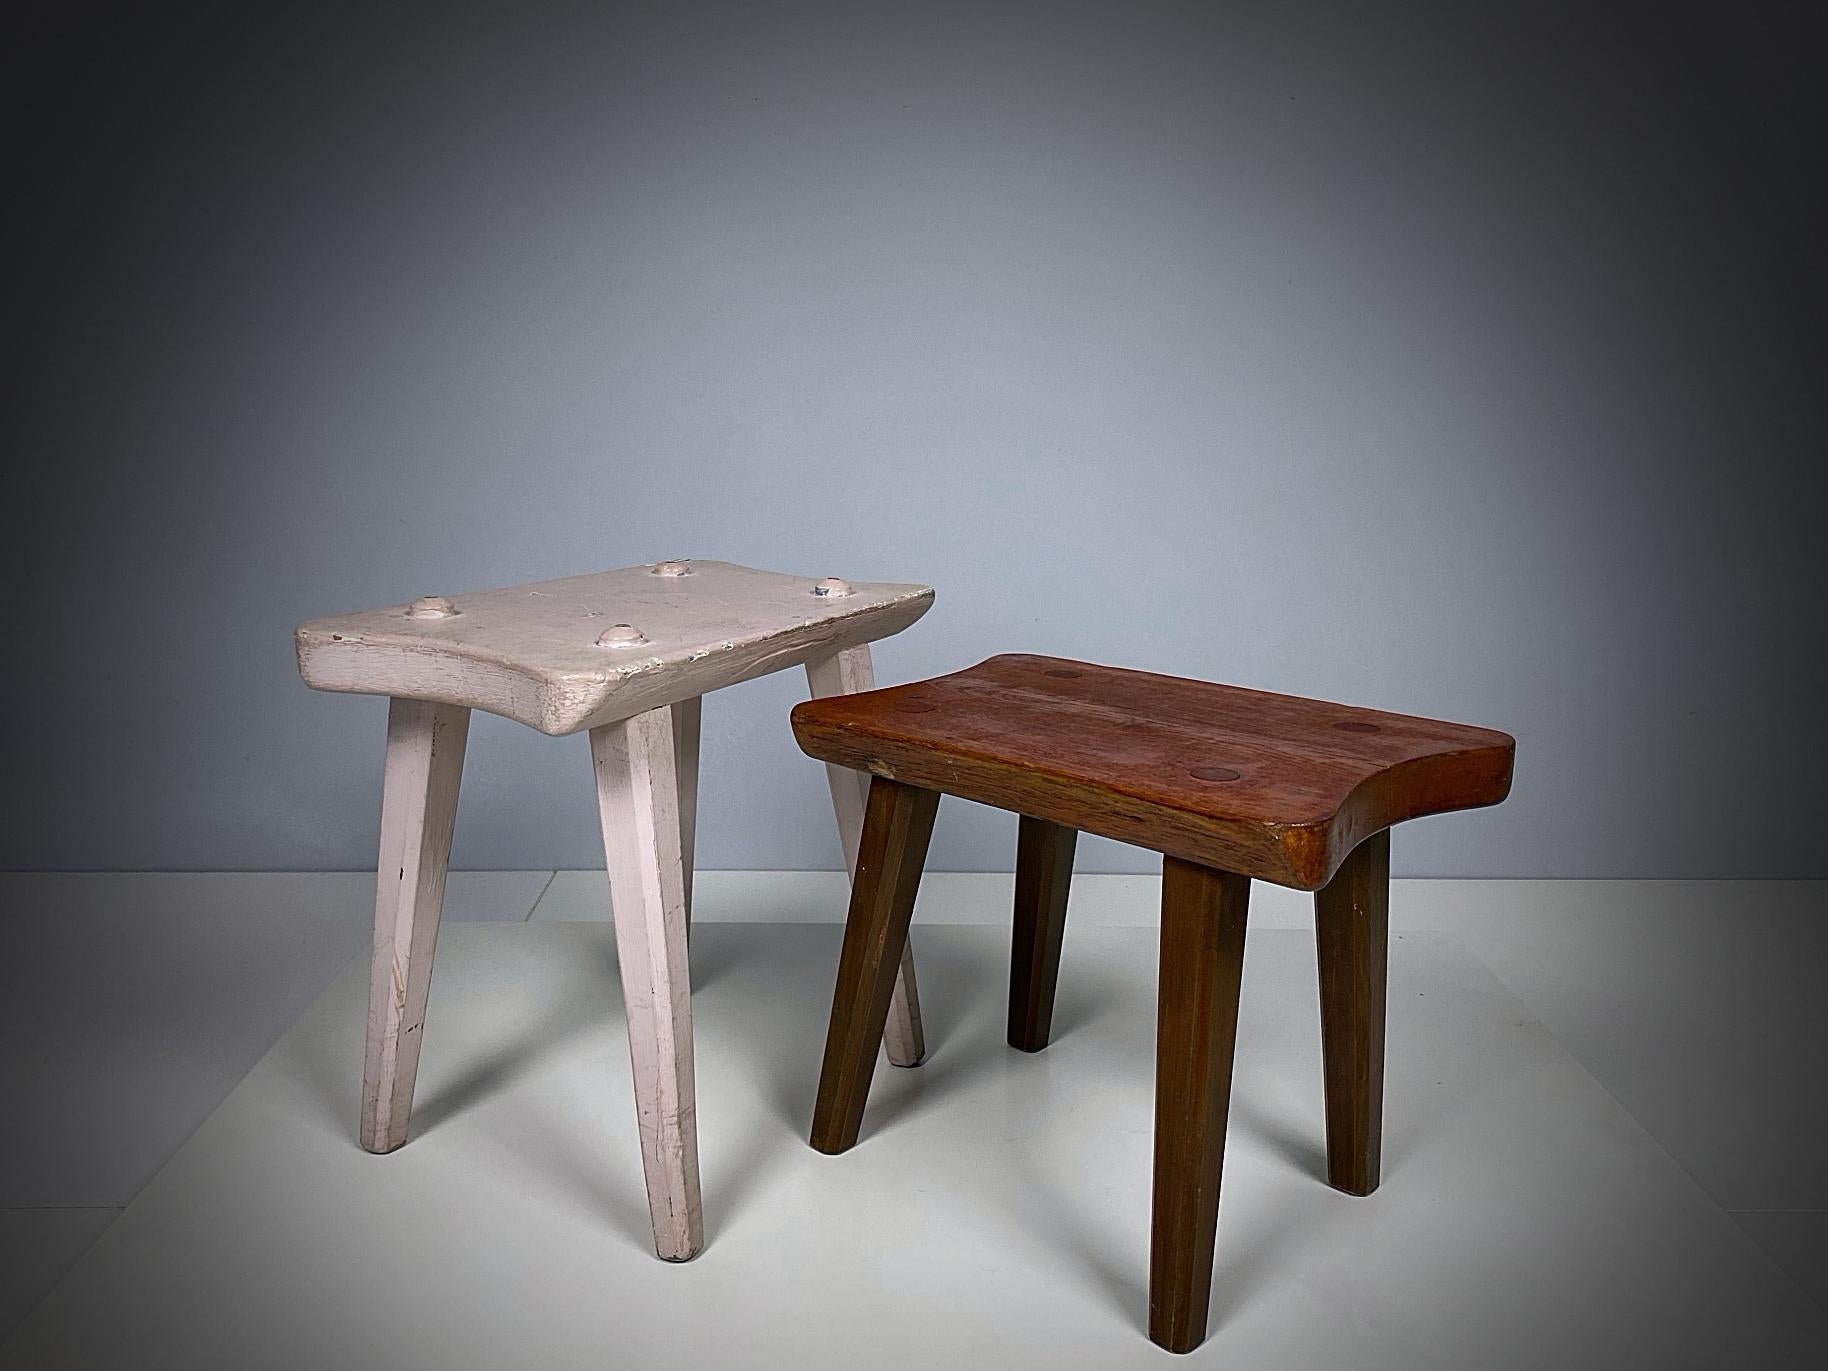 20th Century Midcentury French Artisanal Crème Oak Stool, 1950s, France For Sale